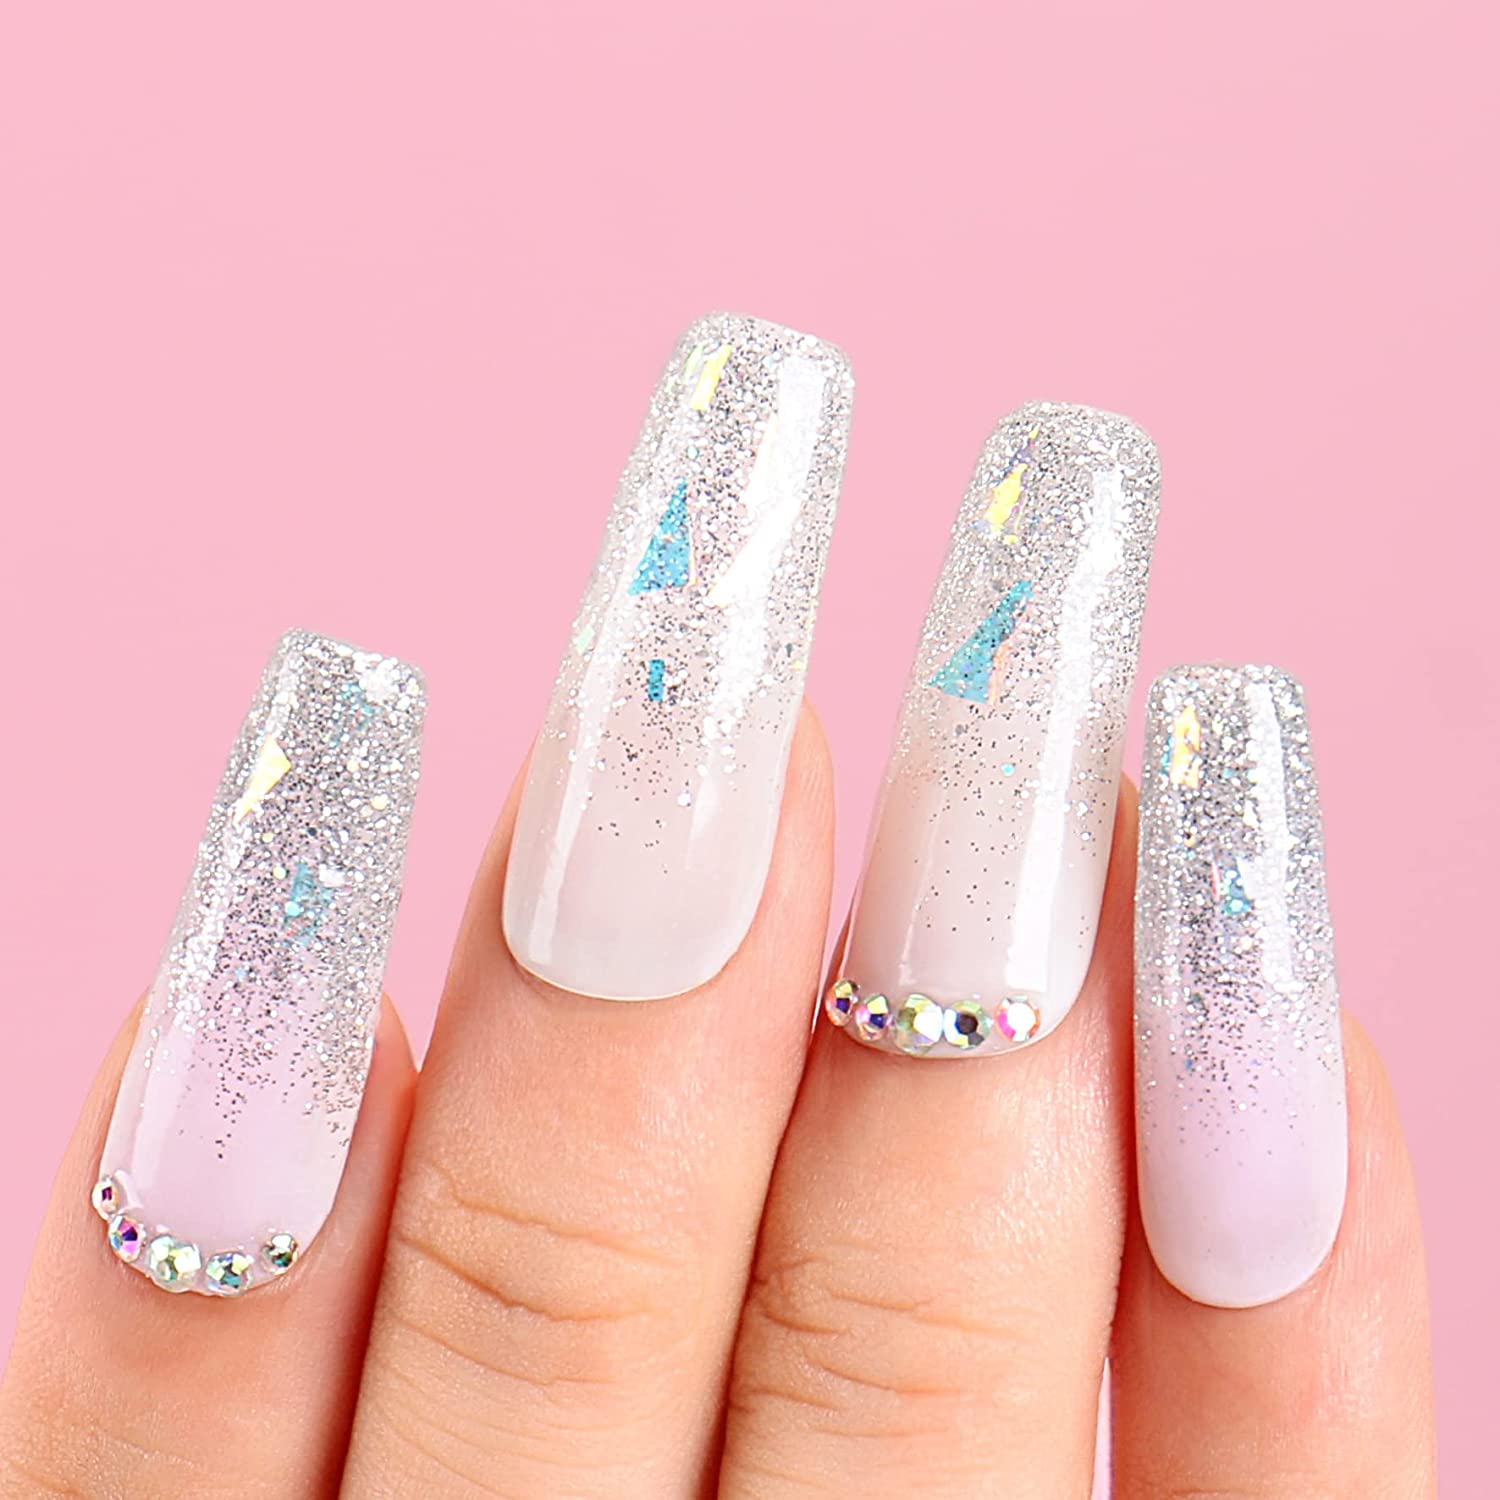 REIMICHI Super Stay Quick-dry Smooth & Perfect Rainbow & White Glitter Nail  Paint RAINBOW, PINK - Price in India, Buy REIMICHI Super Stay Quick-dry  Smooth & Perfect Rainbow & White Glitter Nail